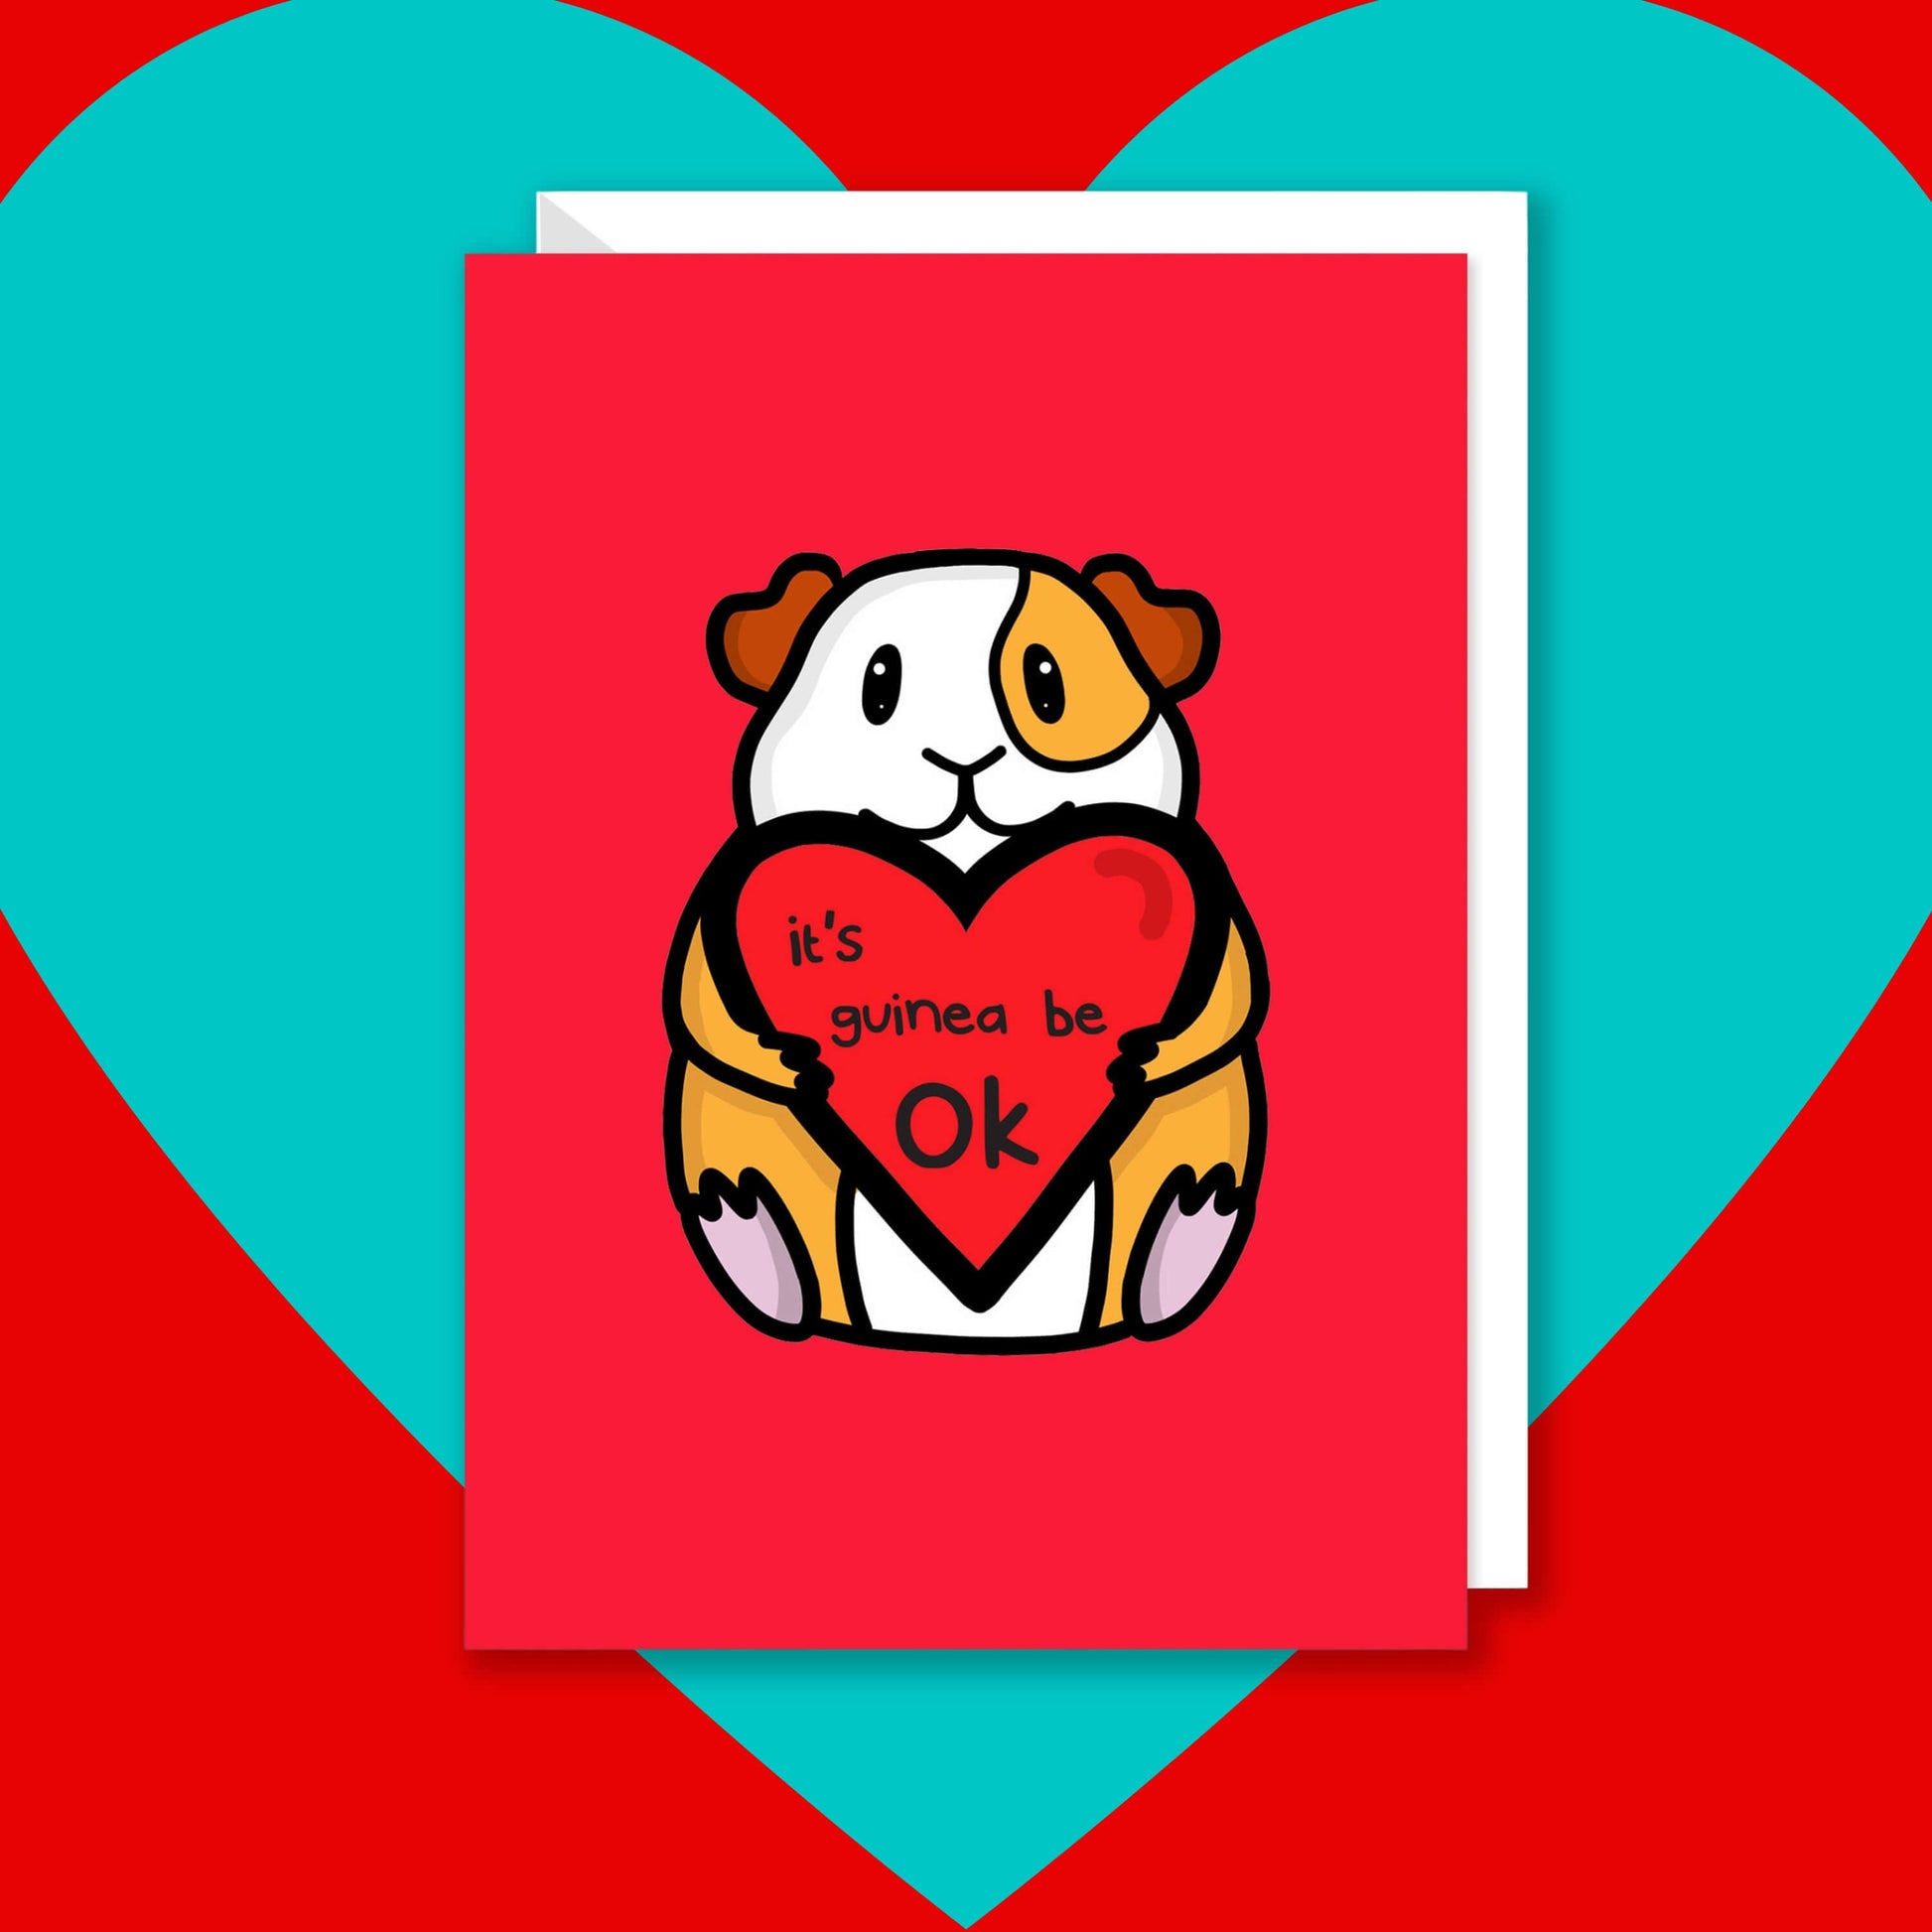 The It's Gonna Be OK Guinea Pig Card on a red and blue background with a white envelope underneath. The red a6 greeting card features a smiling orange and white guinea pig sat down holding a red heart with black text reading 'it's guinea be ok'. The hand drawn design is a perfect send a hug card as a gentle positive reminder.